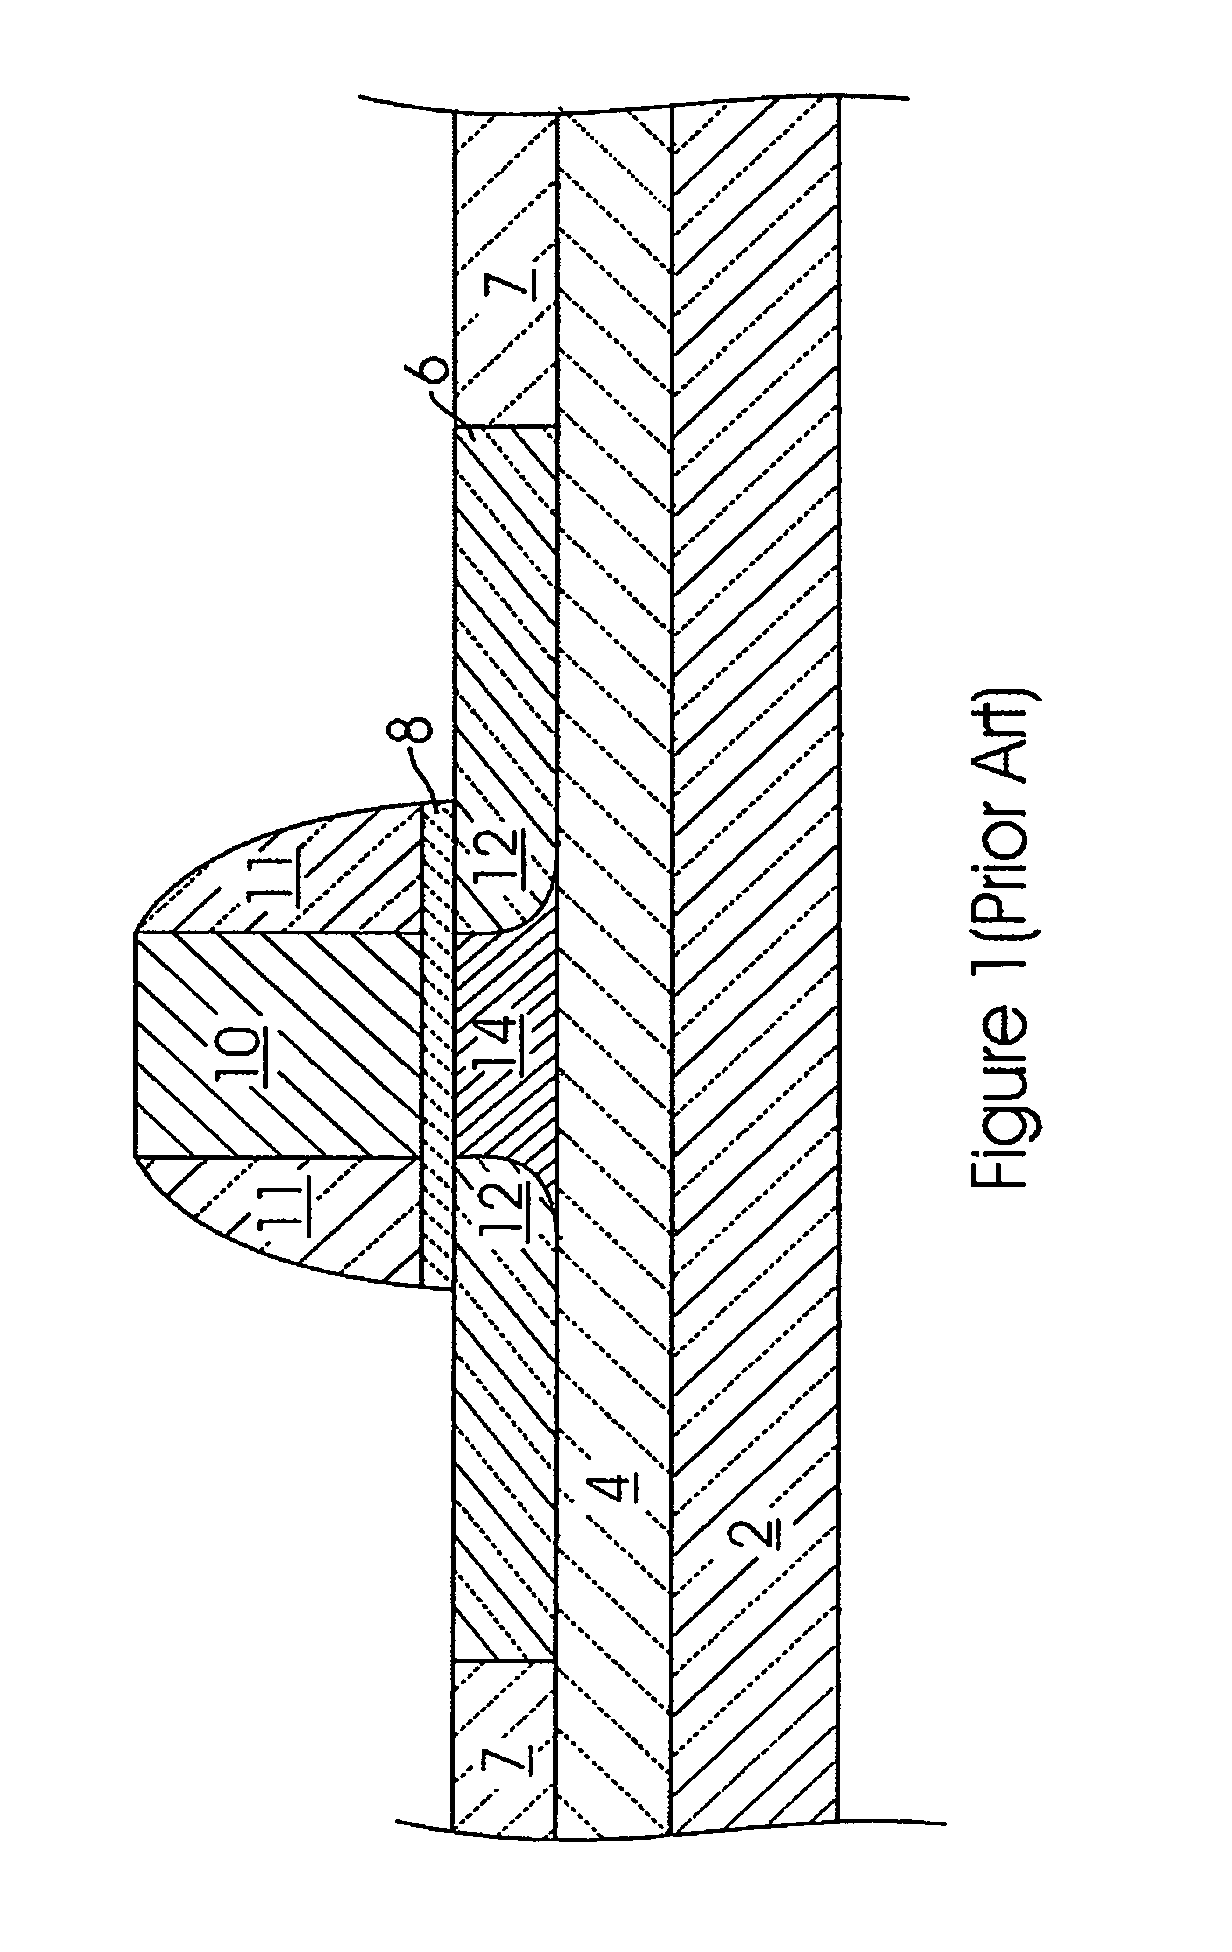 Method for making an ultra thin FDSOI device with improved short-channel performance